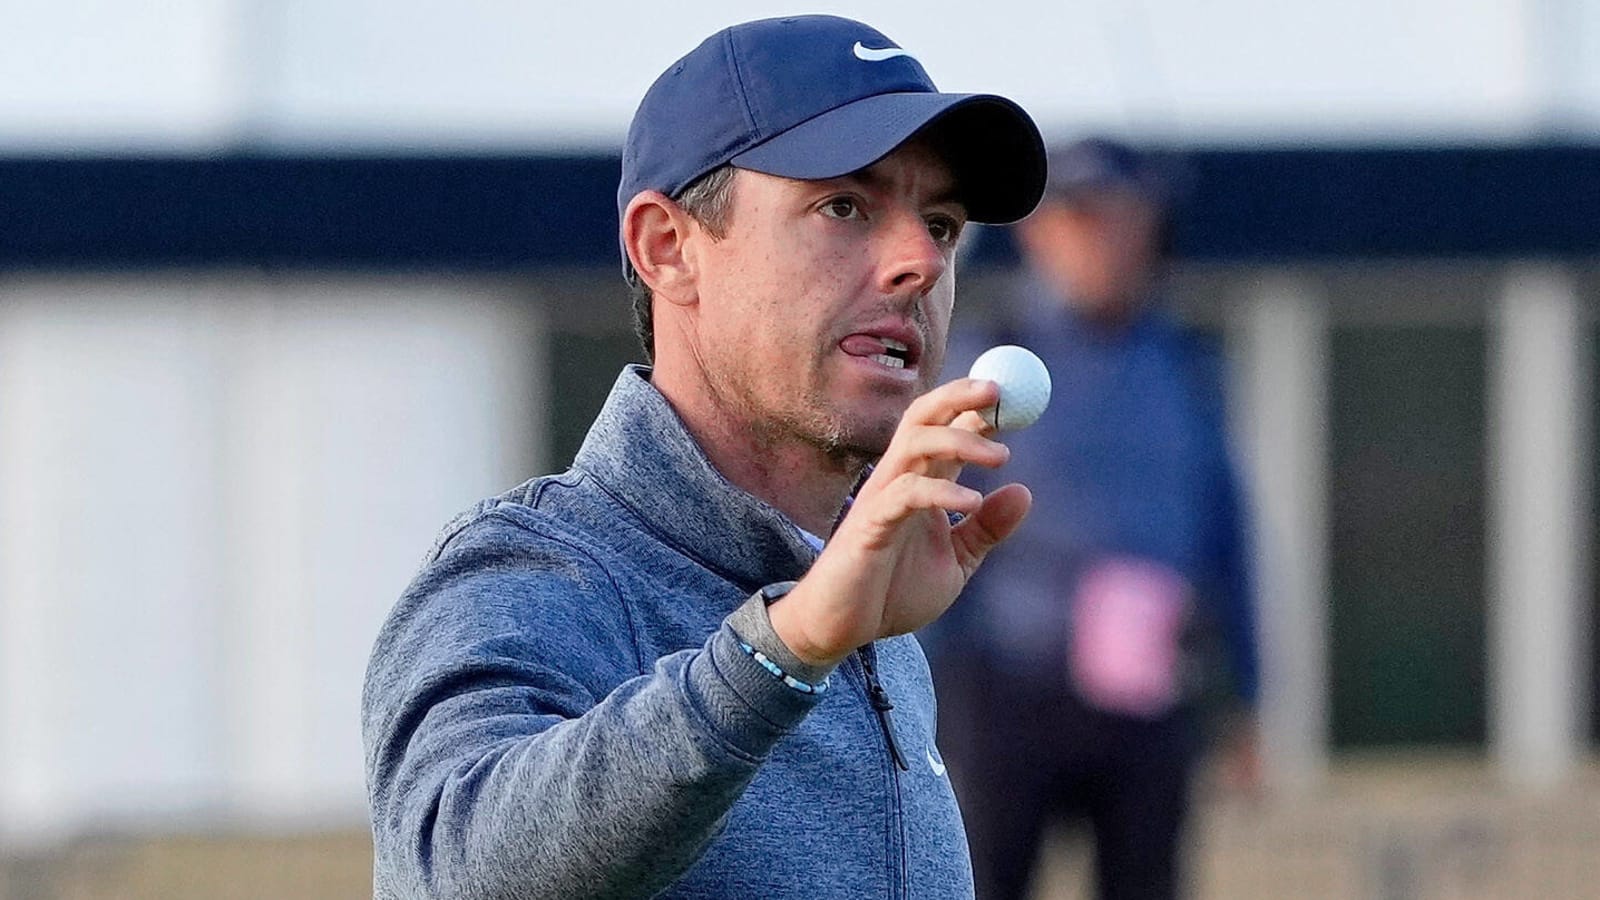 Radio call of Rory McIlroy's eagle is awesome